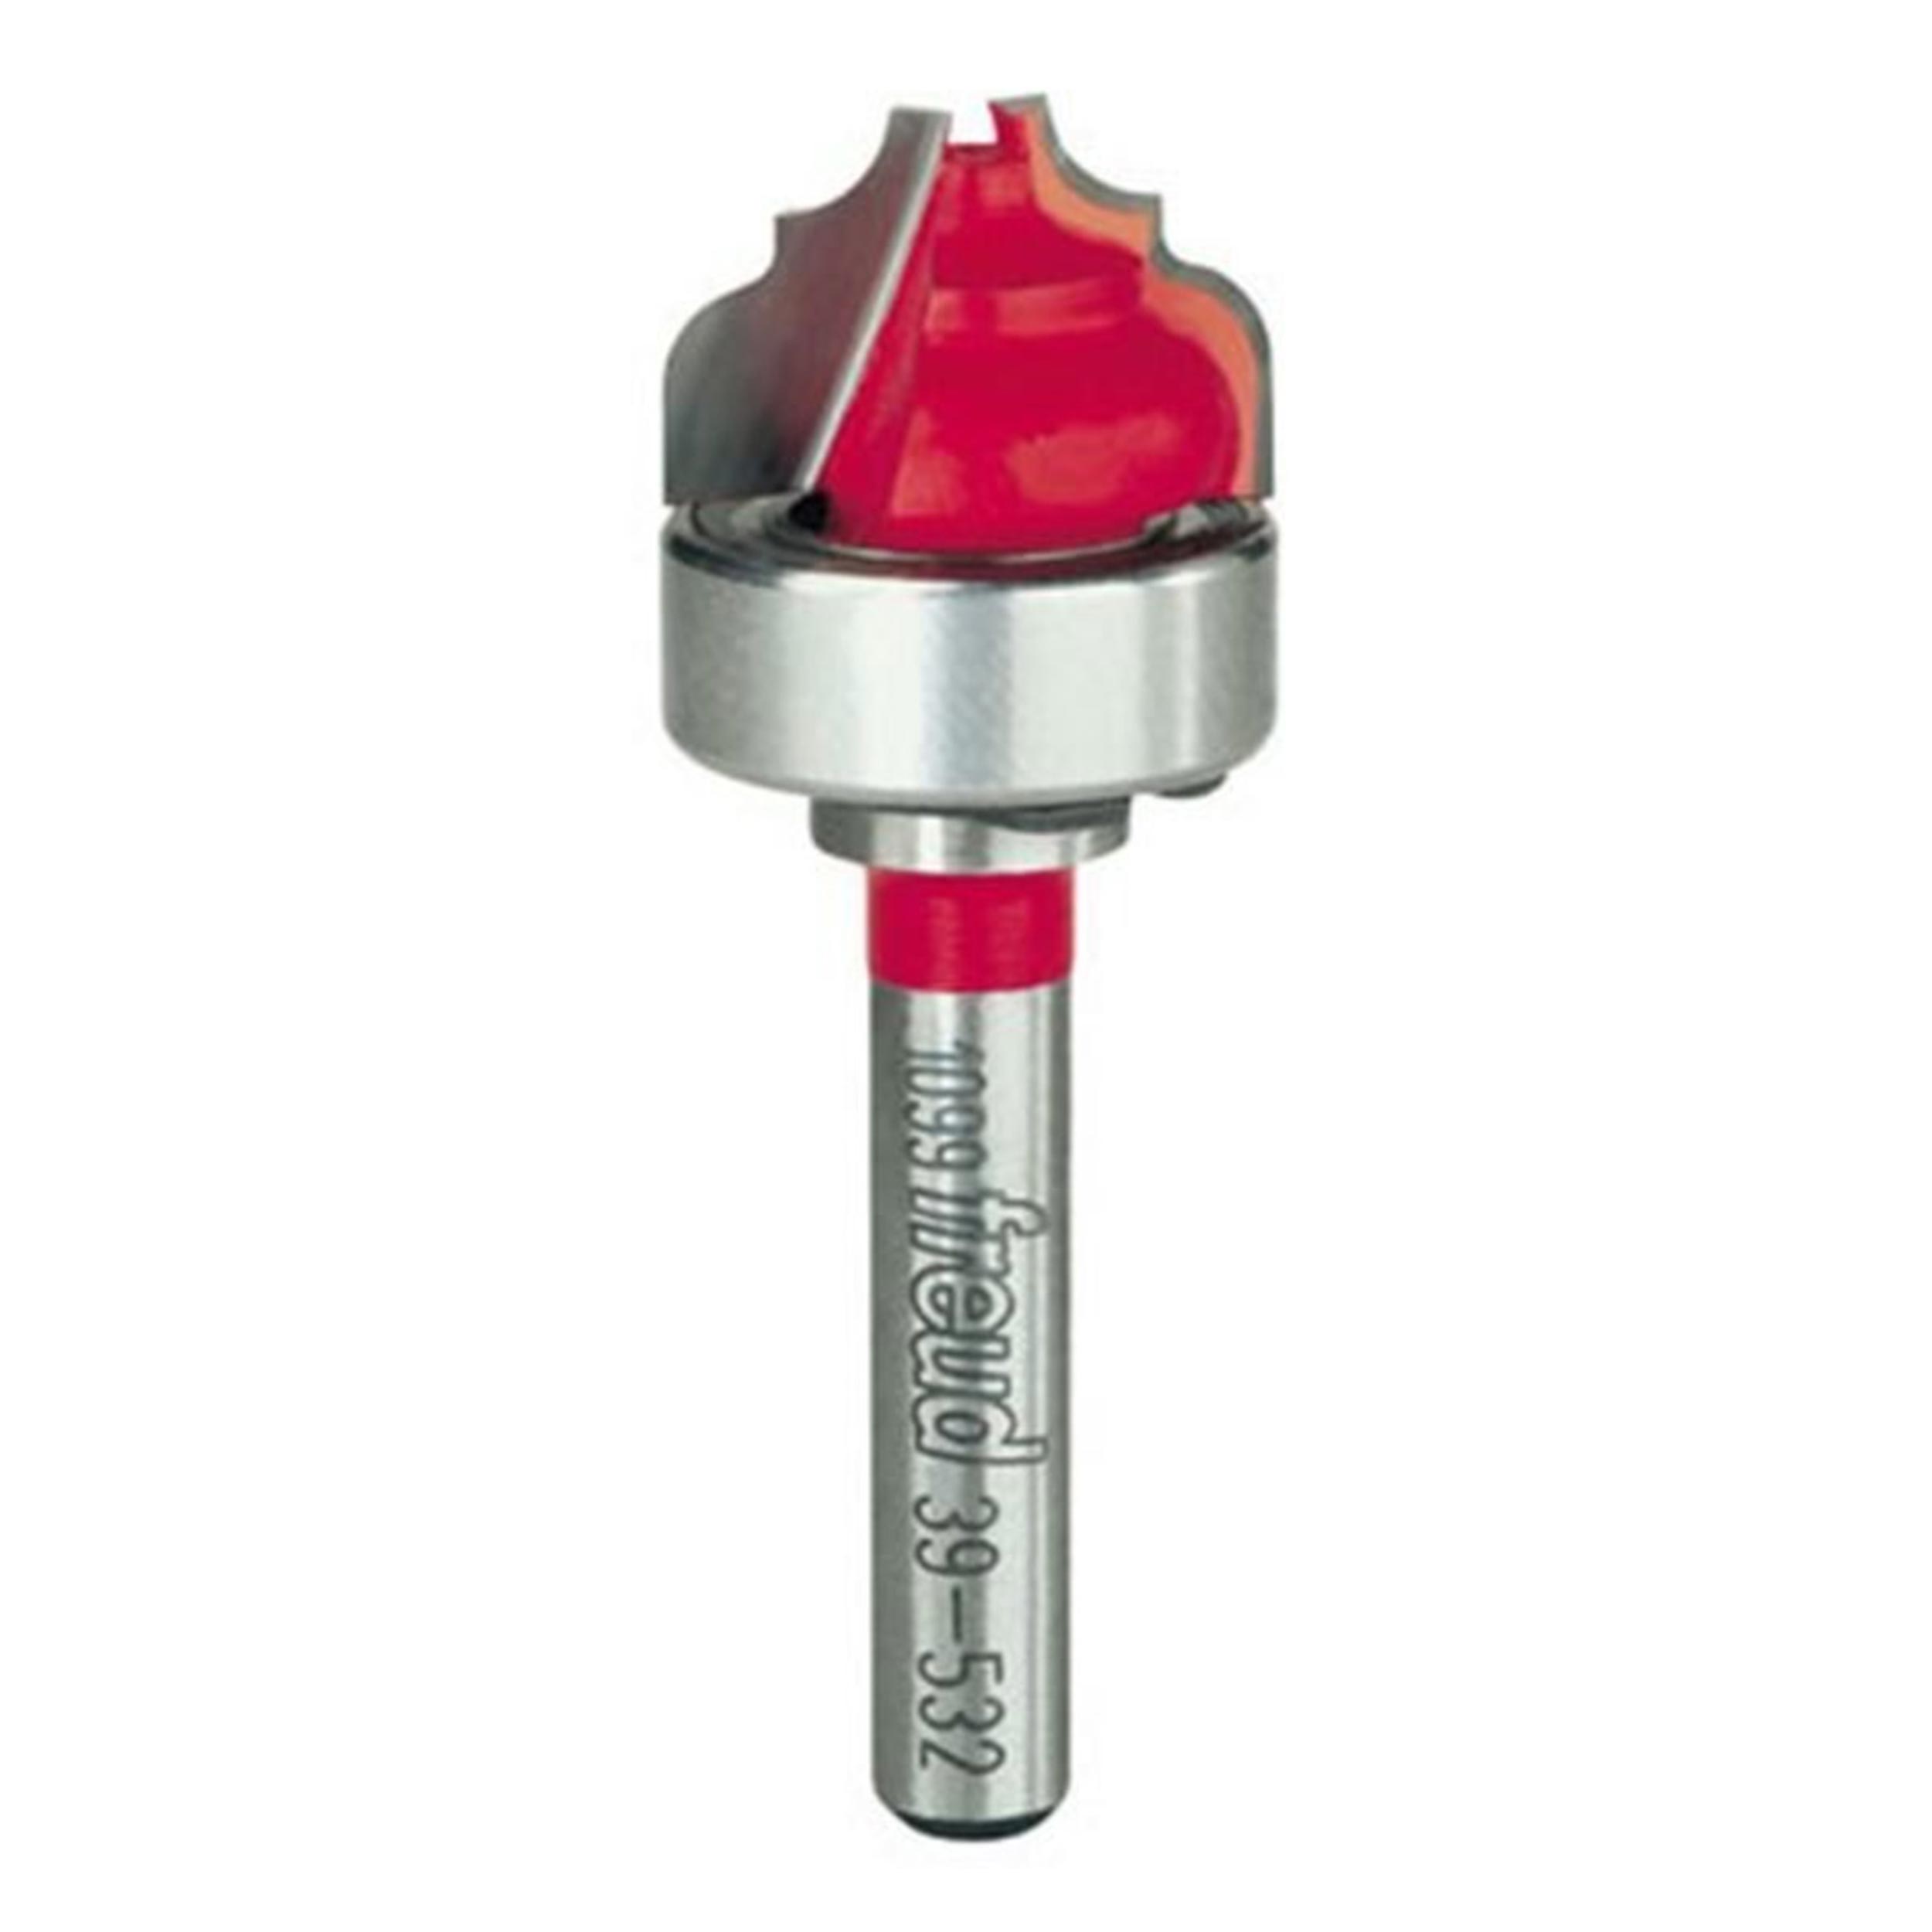 39-532 Cove And Bead Groove Router Bit With Top Bearing 1/4" Sh 3/4" D 31/64" Cl 1/8" R